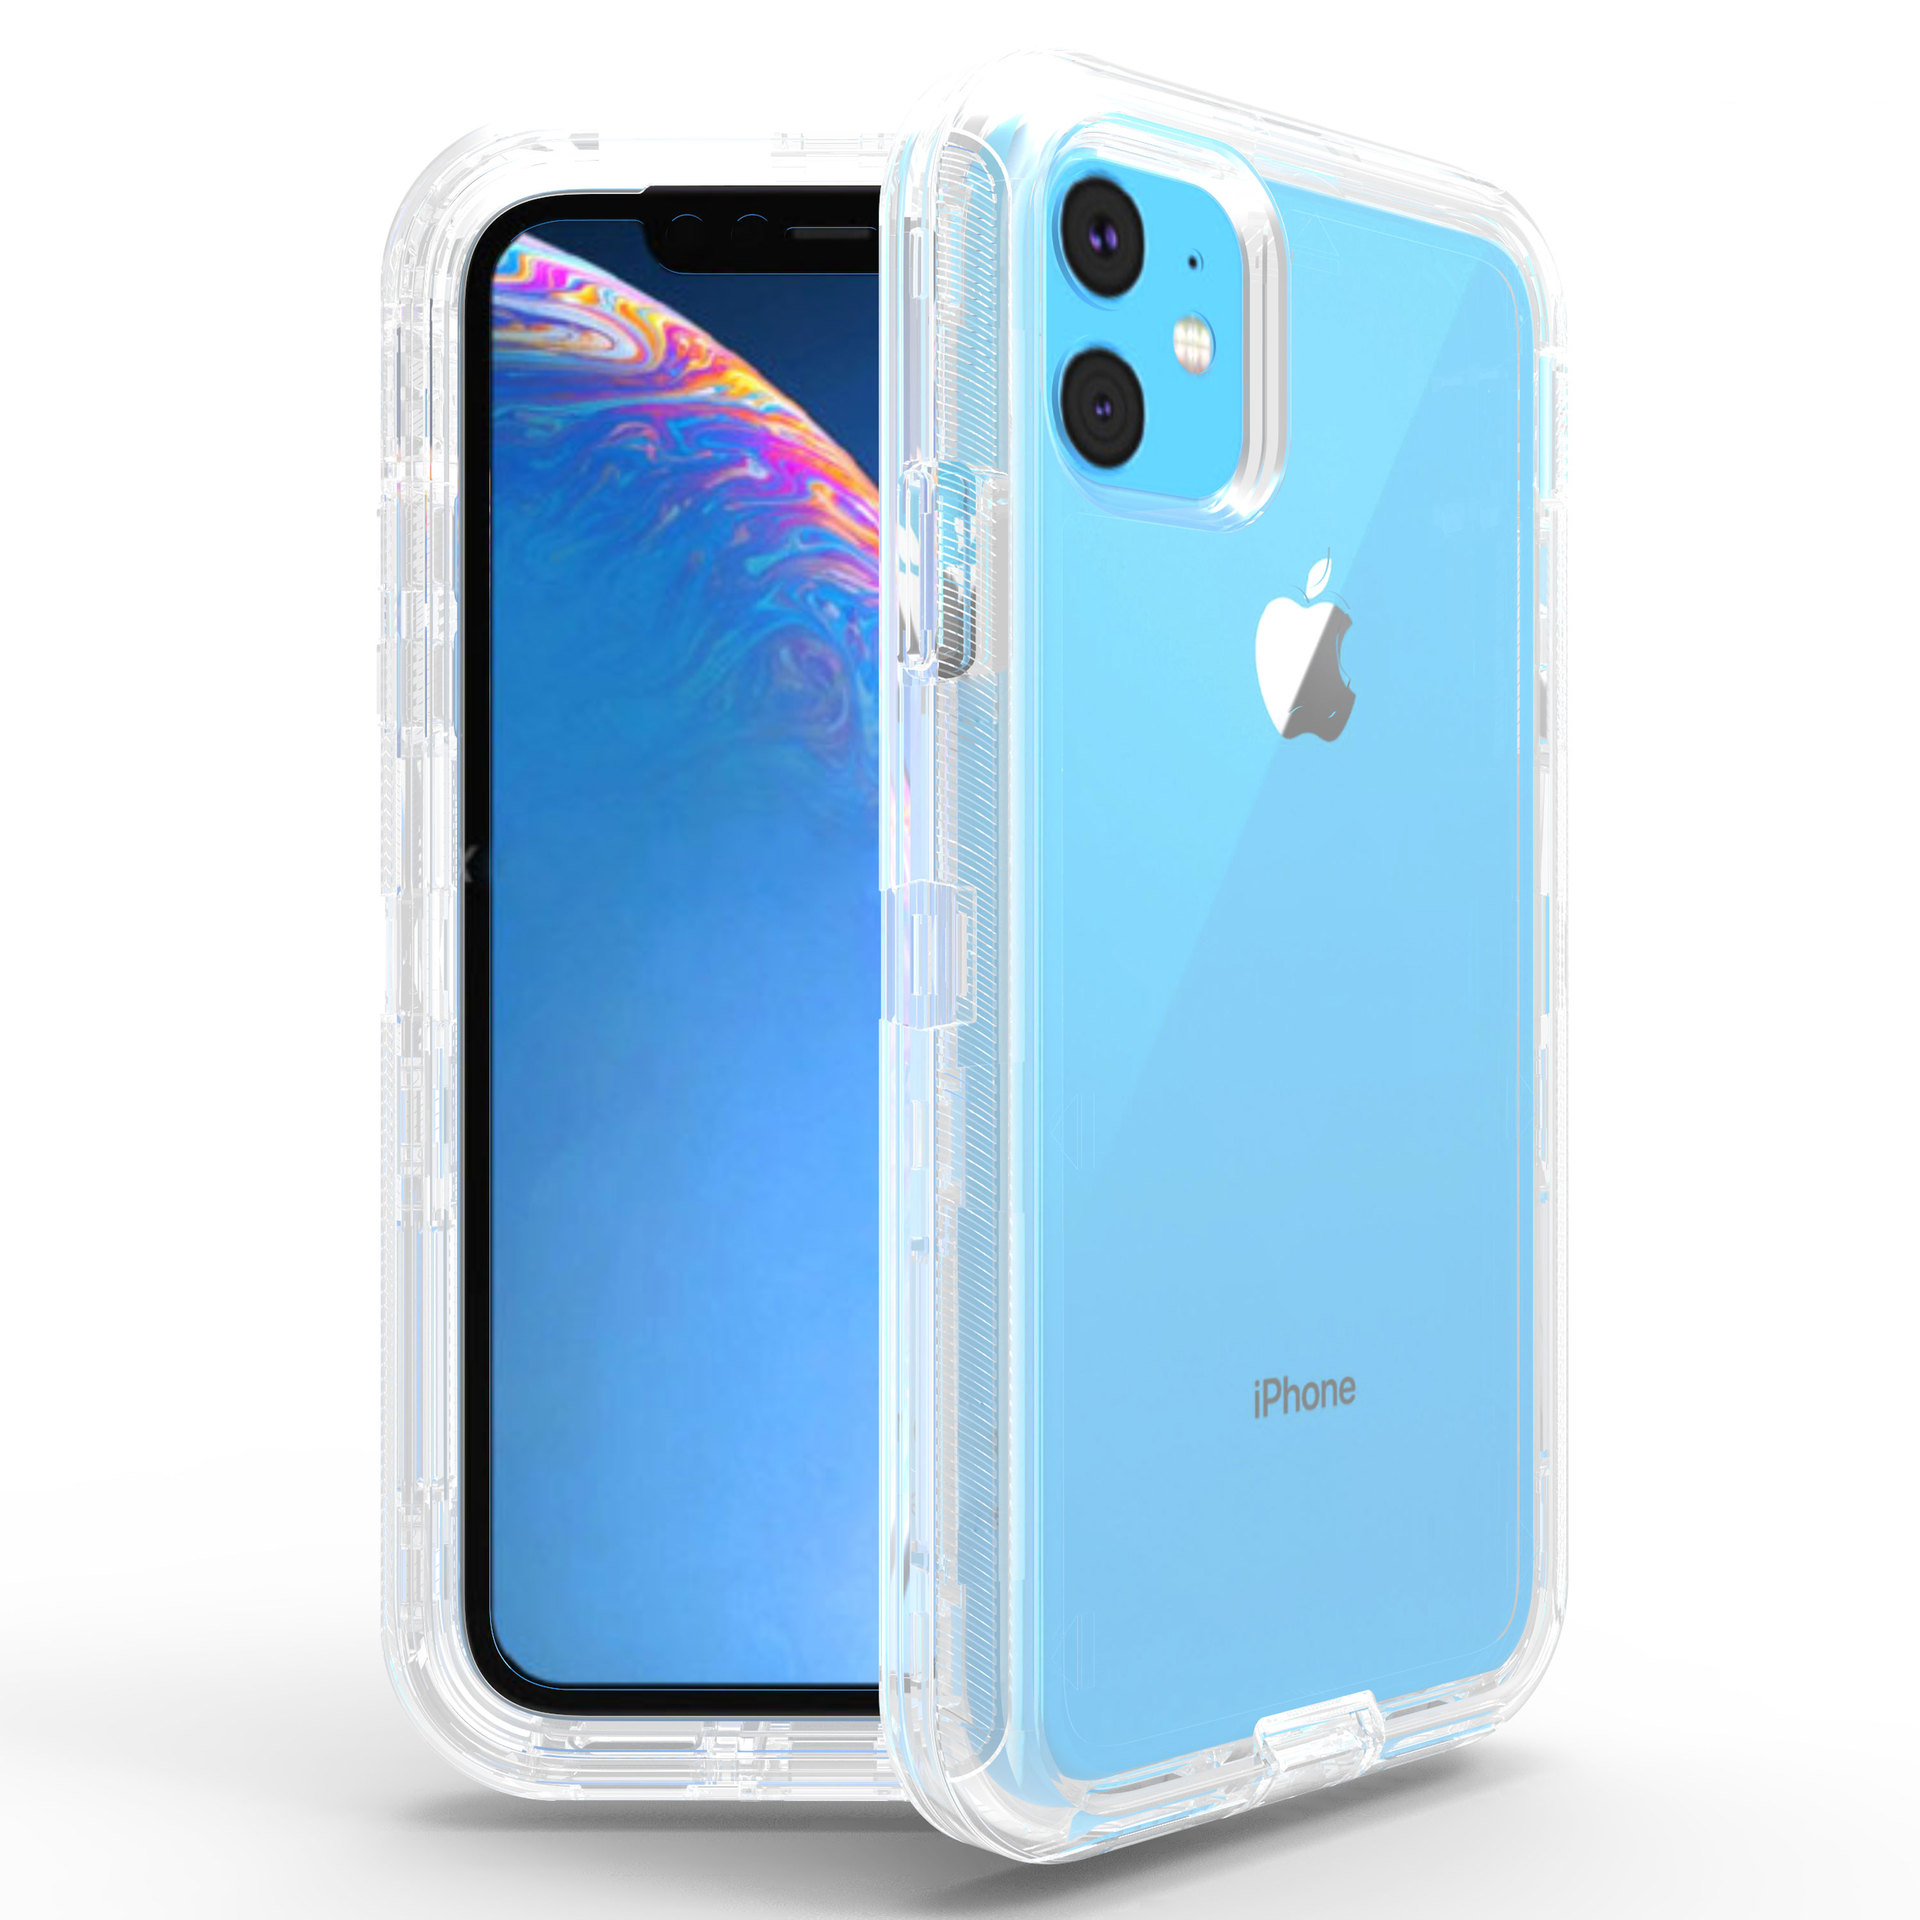 Transparent Armor Robot Case for IPHONE 12 Mini 5.4 (Clear)